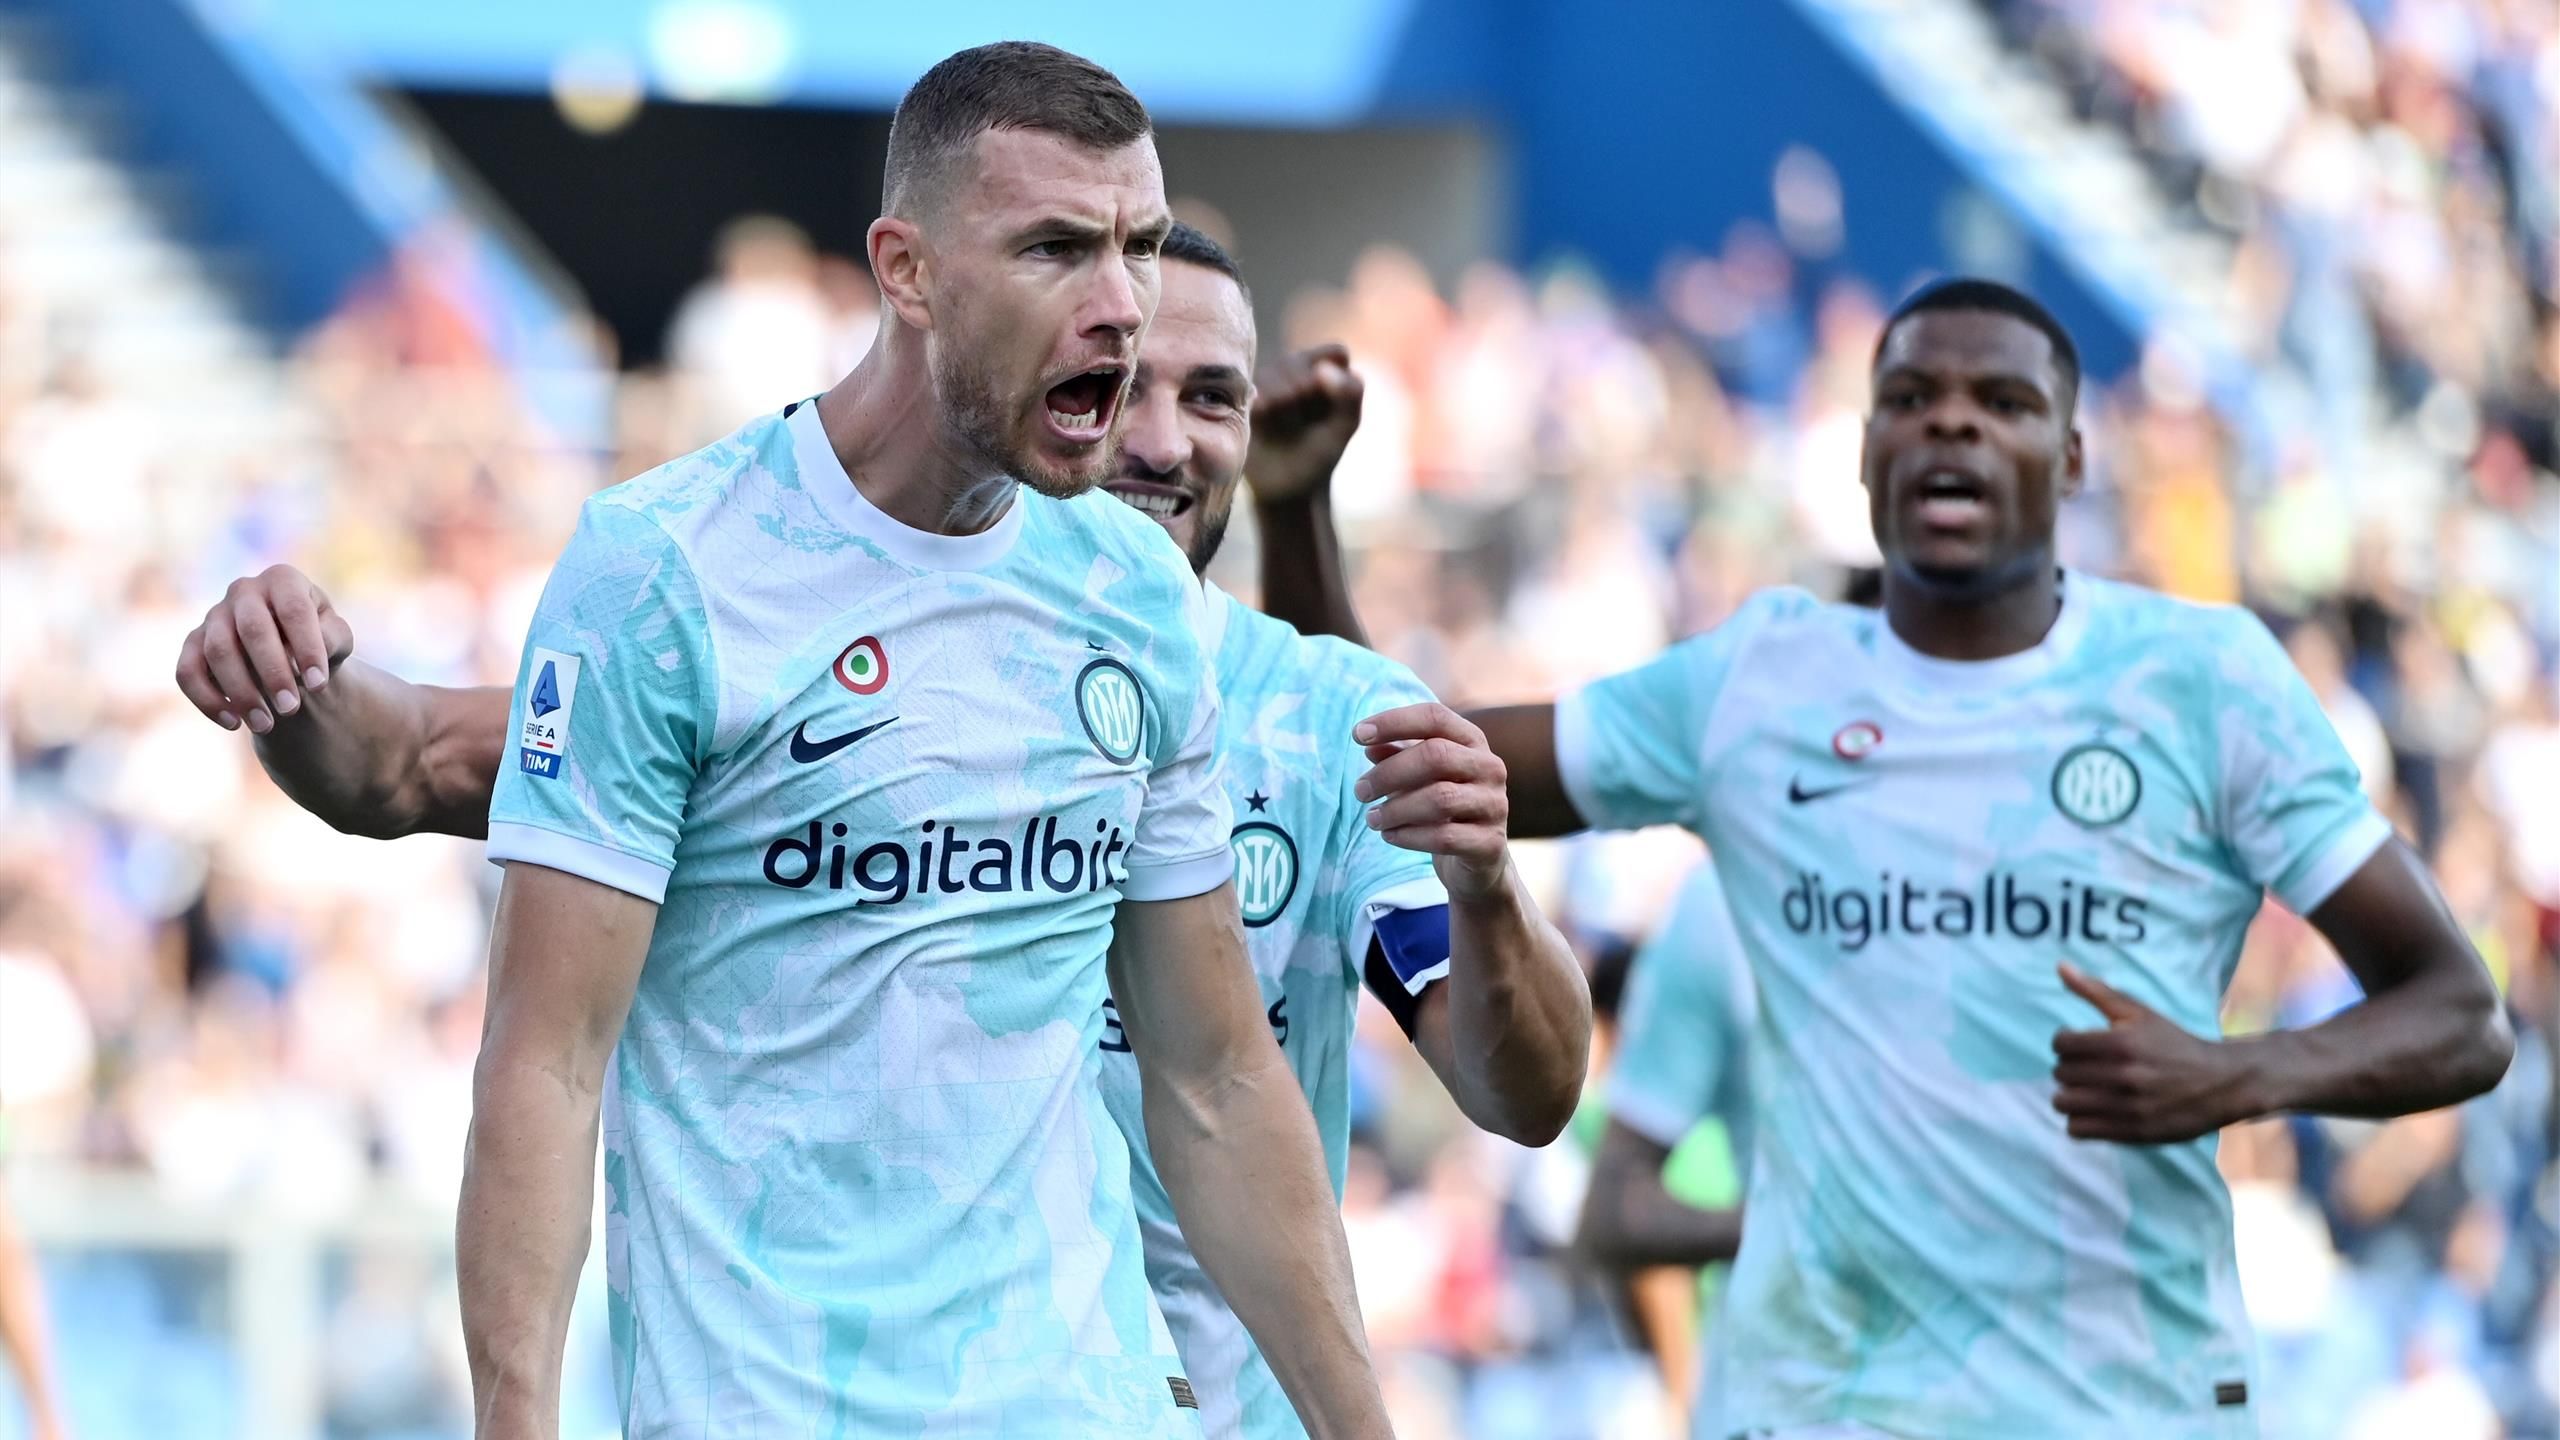 Sassuolo 1-2 Inter Milan Edin Dzeko at the double as Simone Inzaghis side secure welcome win in Serie A